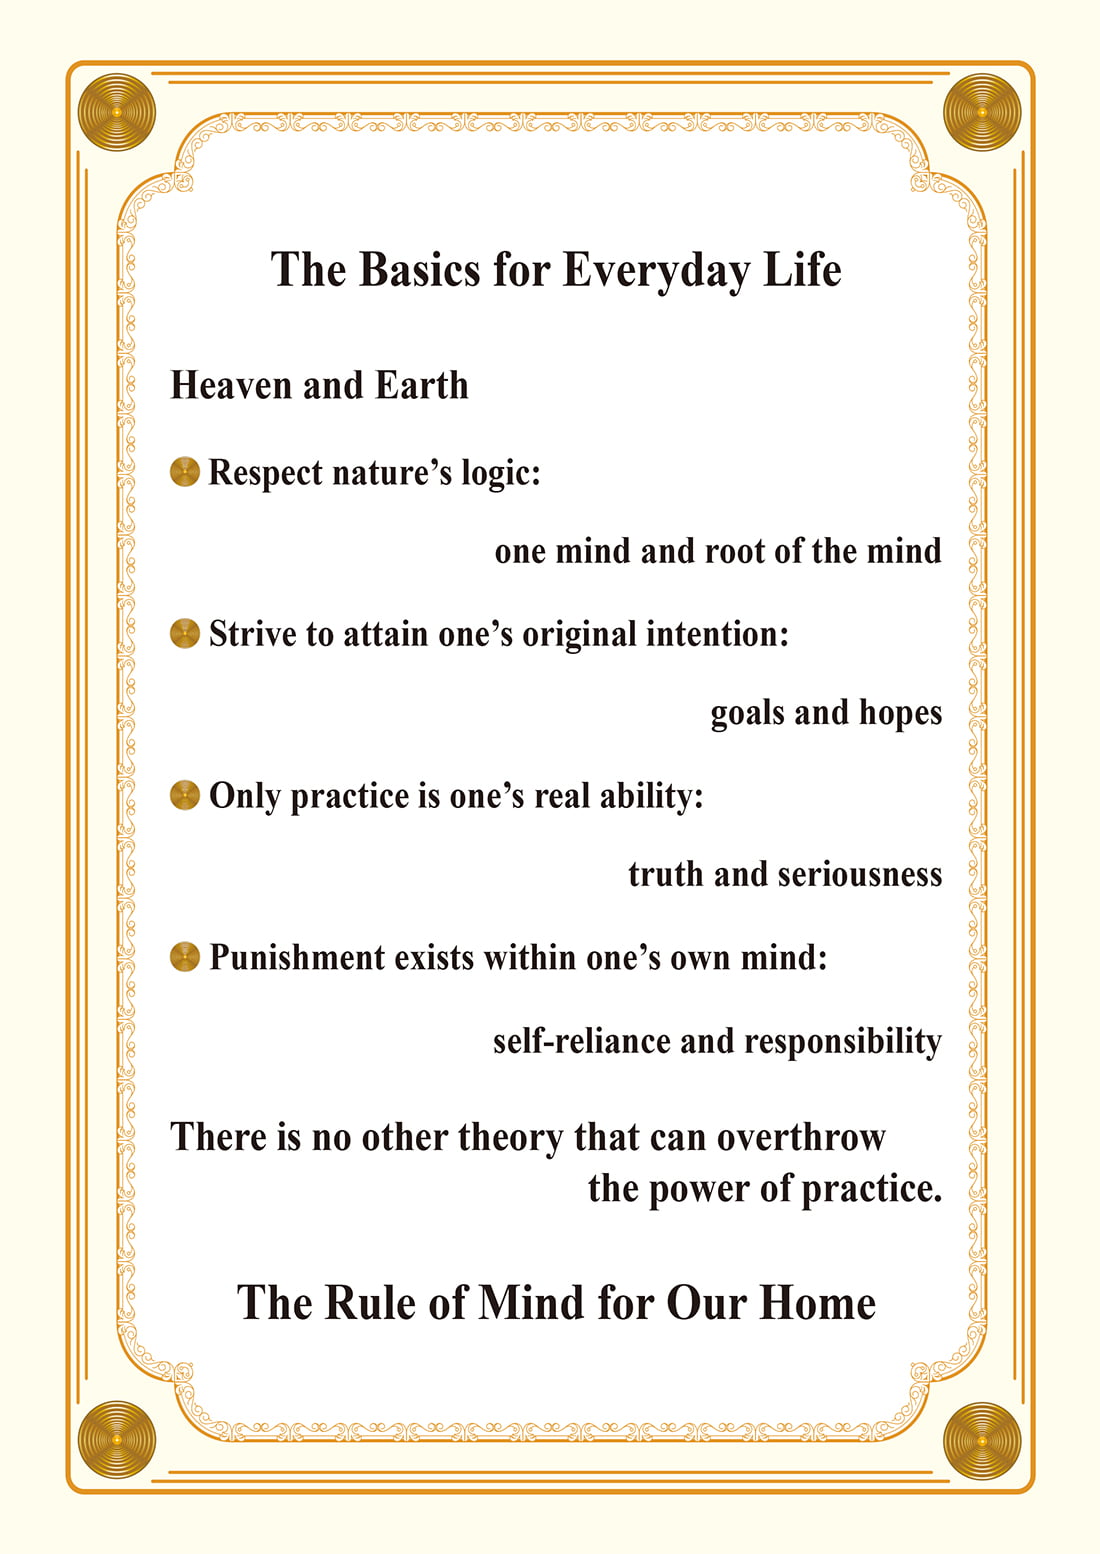 The Basics for Everyday Life